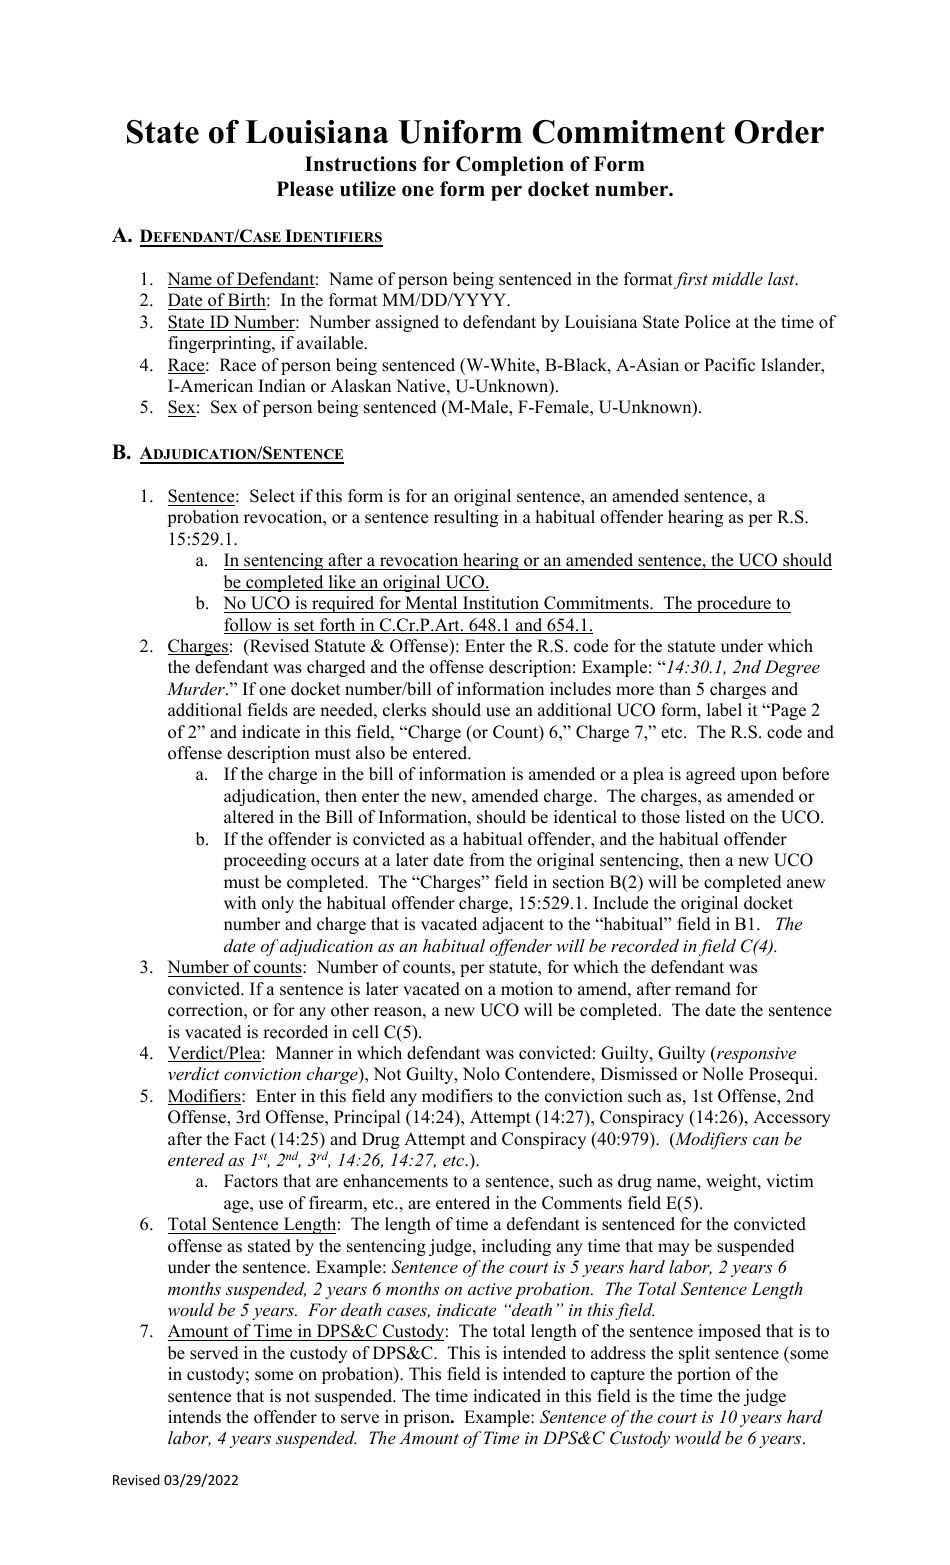 Instructions for Uniform Sentencing Commitment Order - Louisiana, Page 1